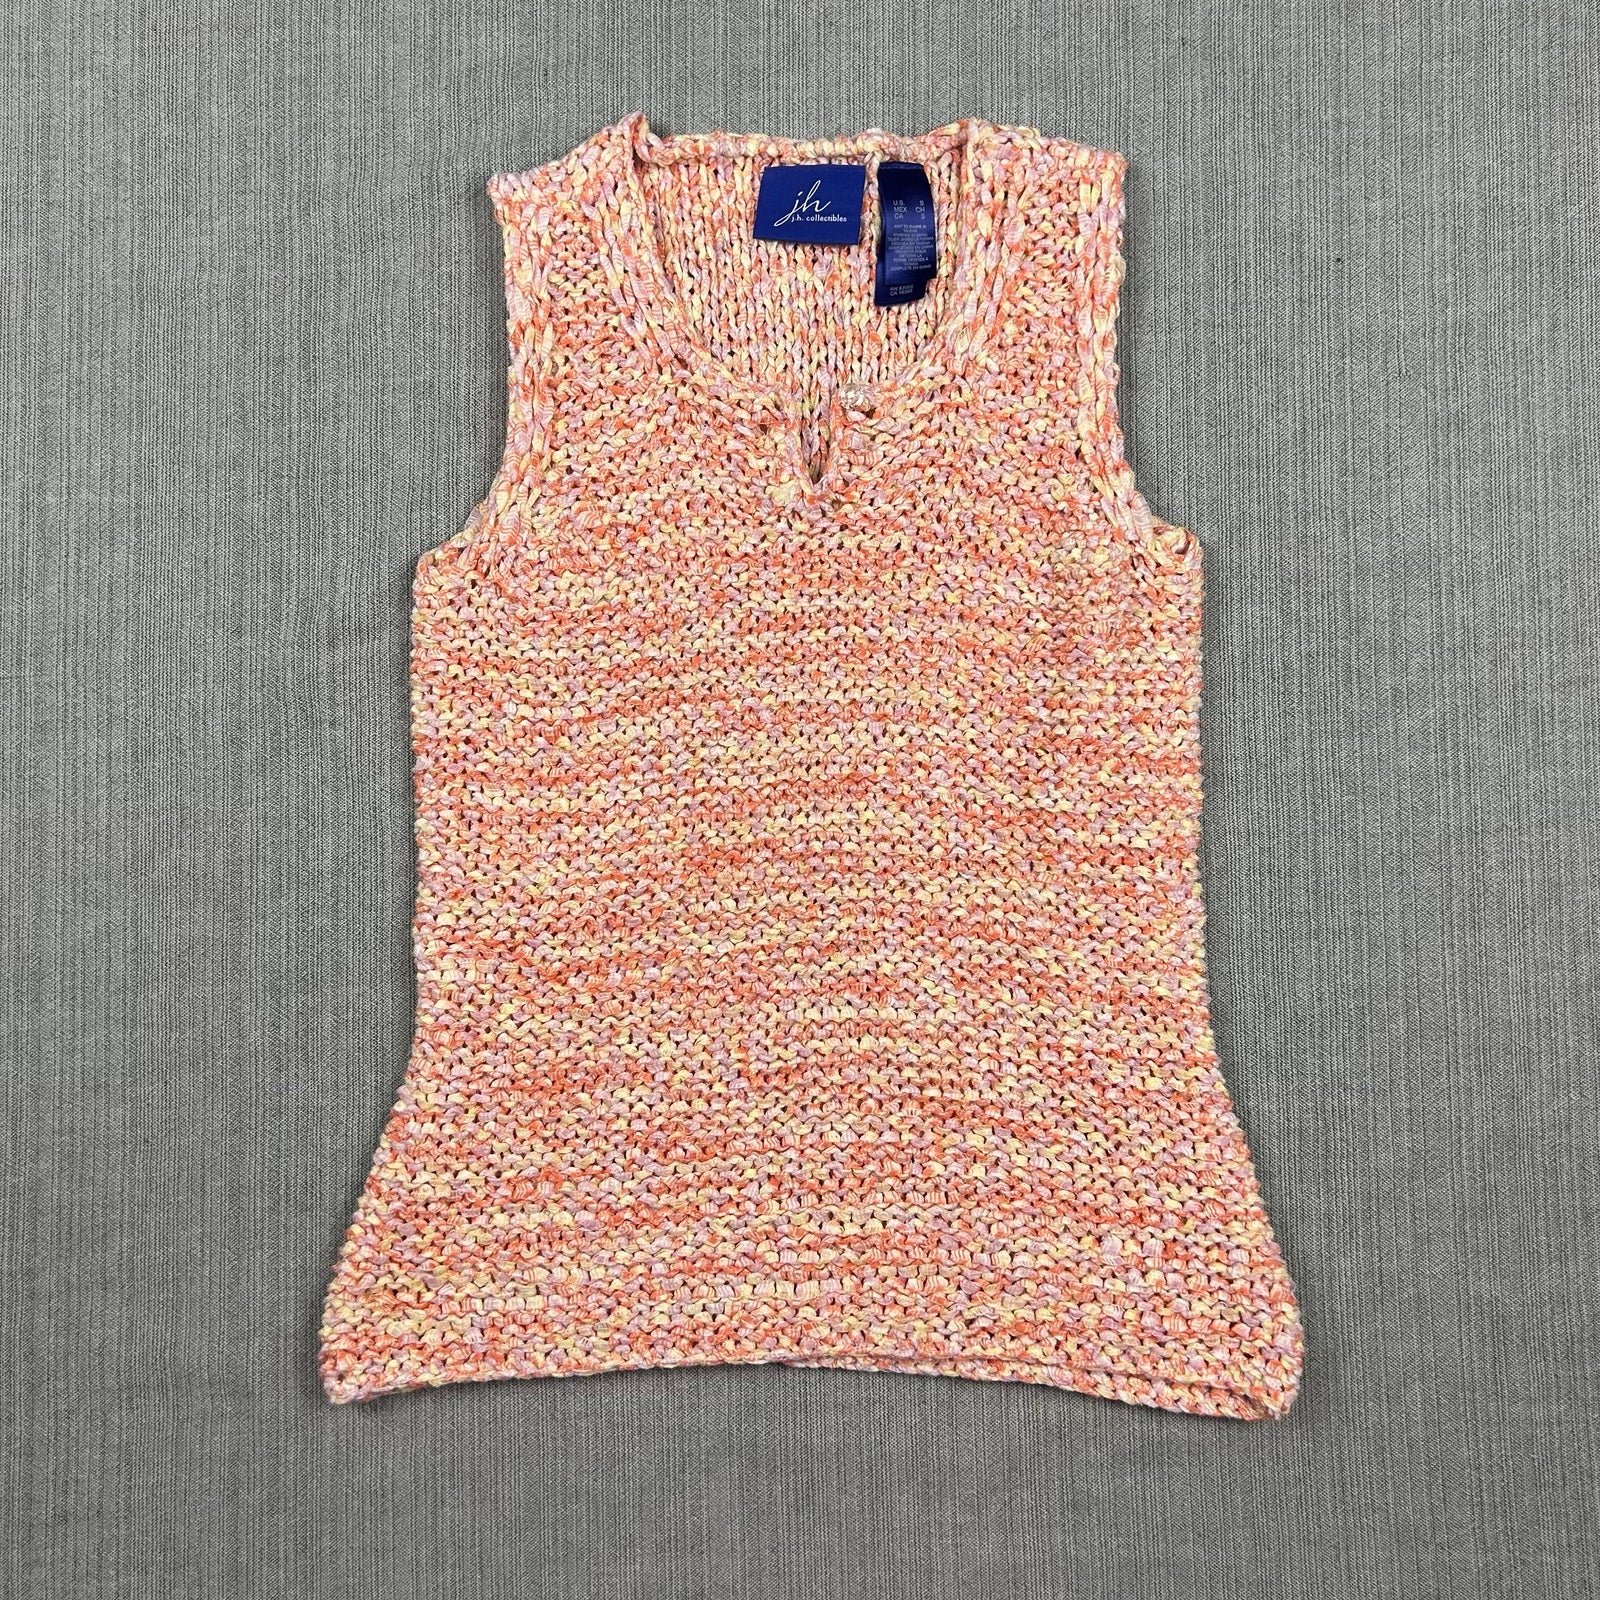 Beautiful JH Collectibles pink knitted tank top size s small lWl2GwzXL Discount